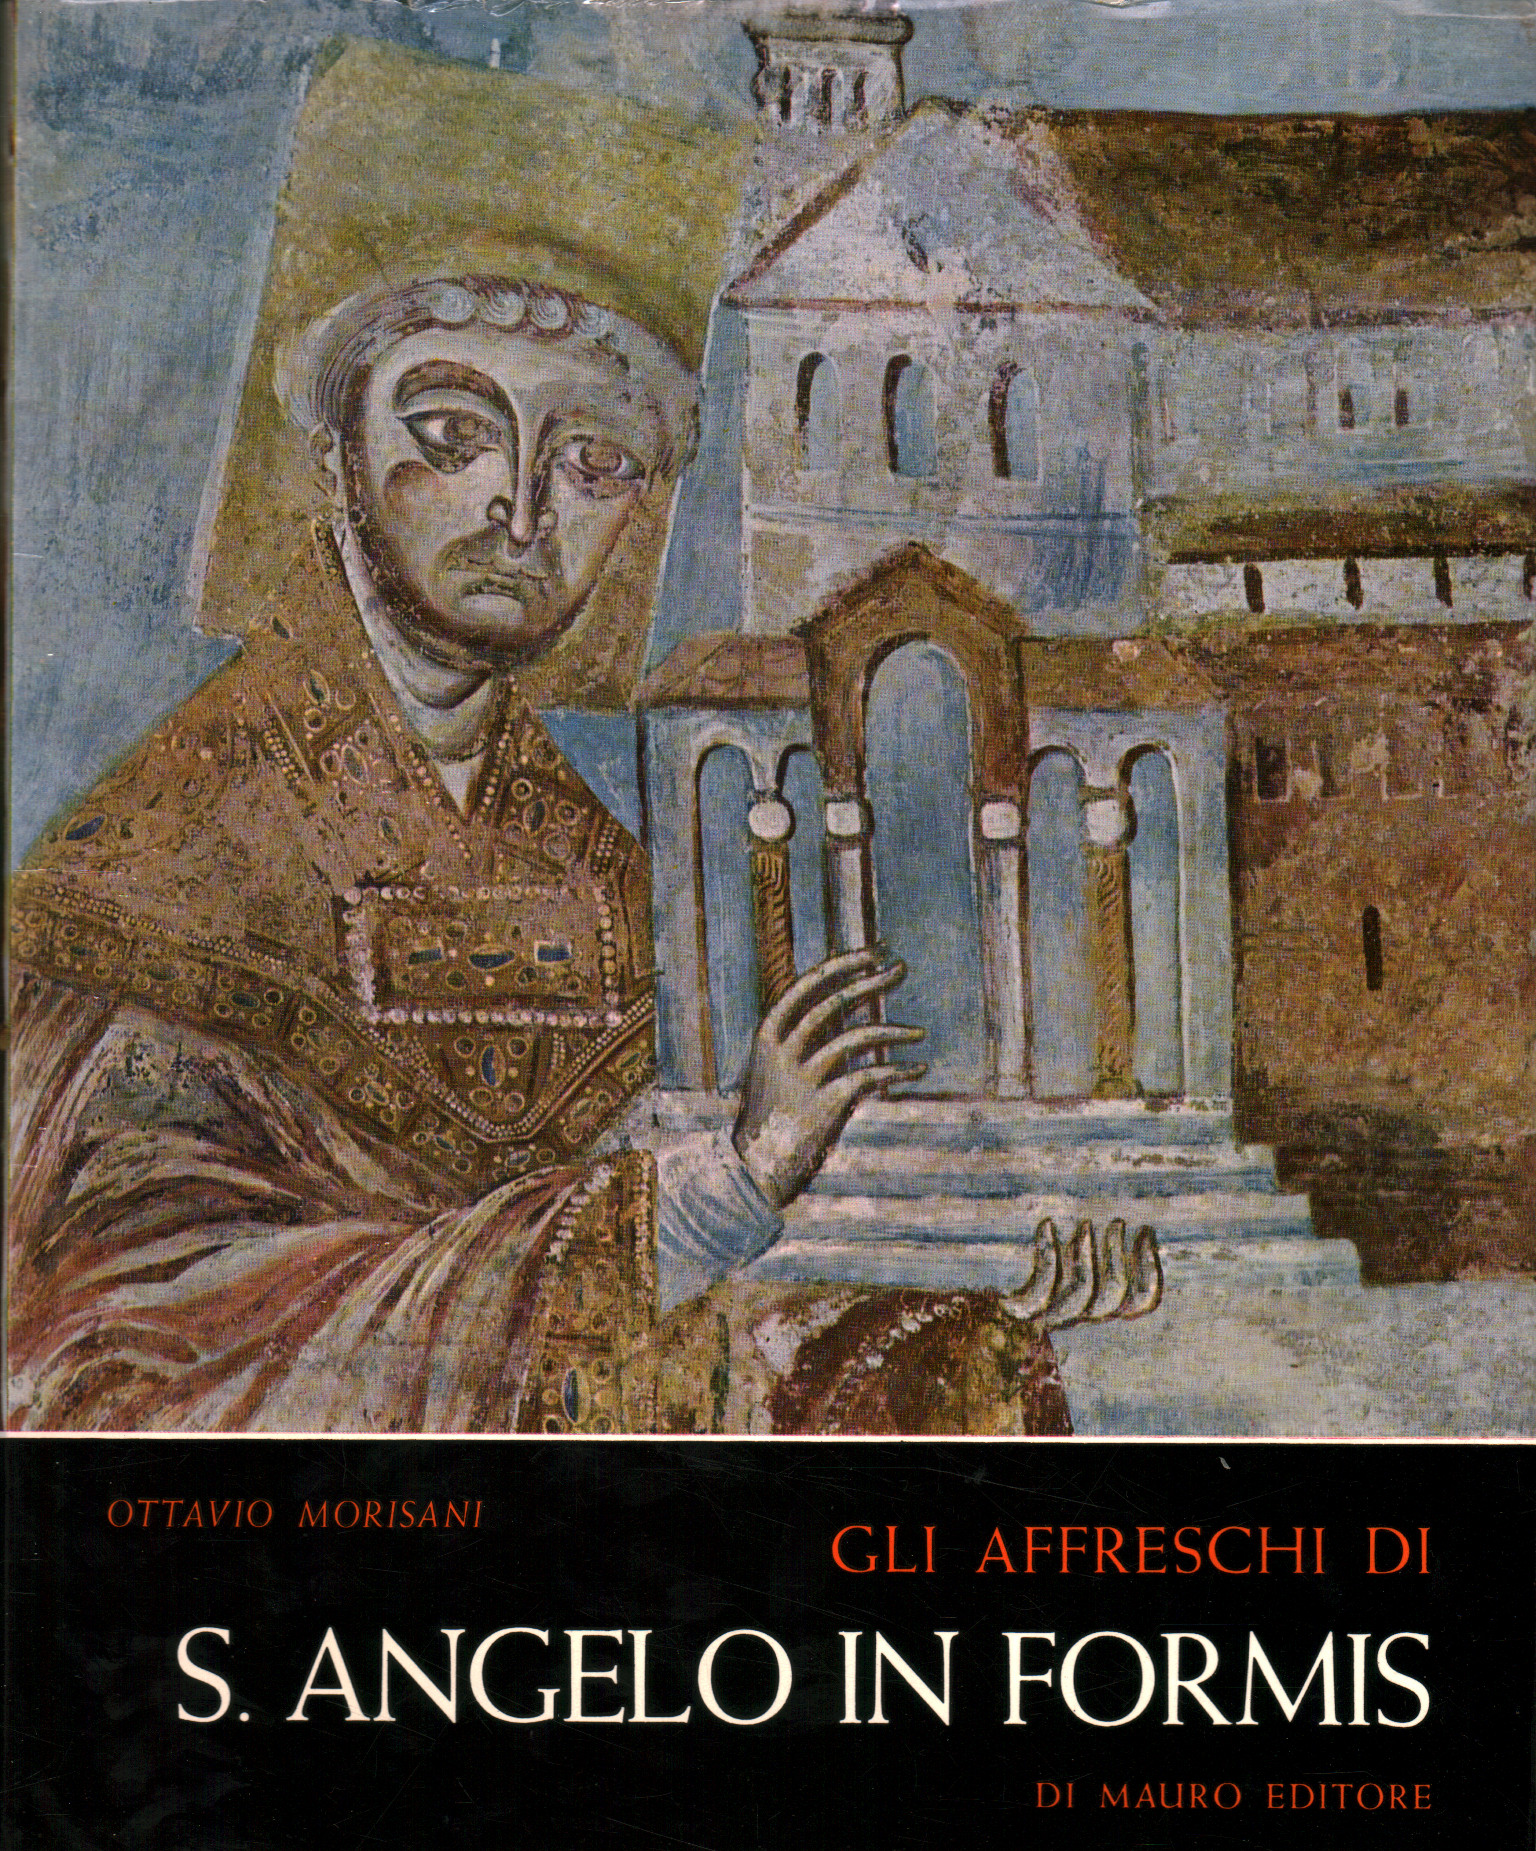 The frescoes of S. Angelo in Formis